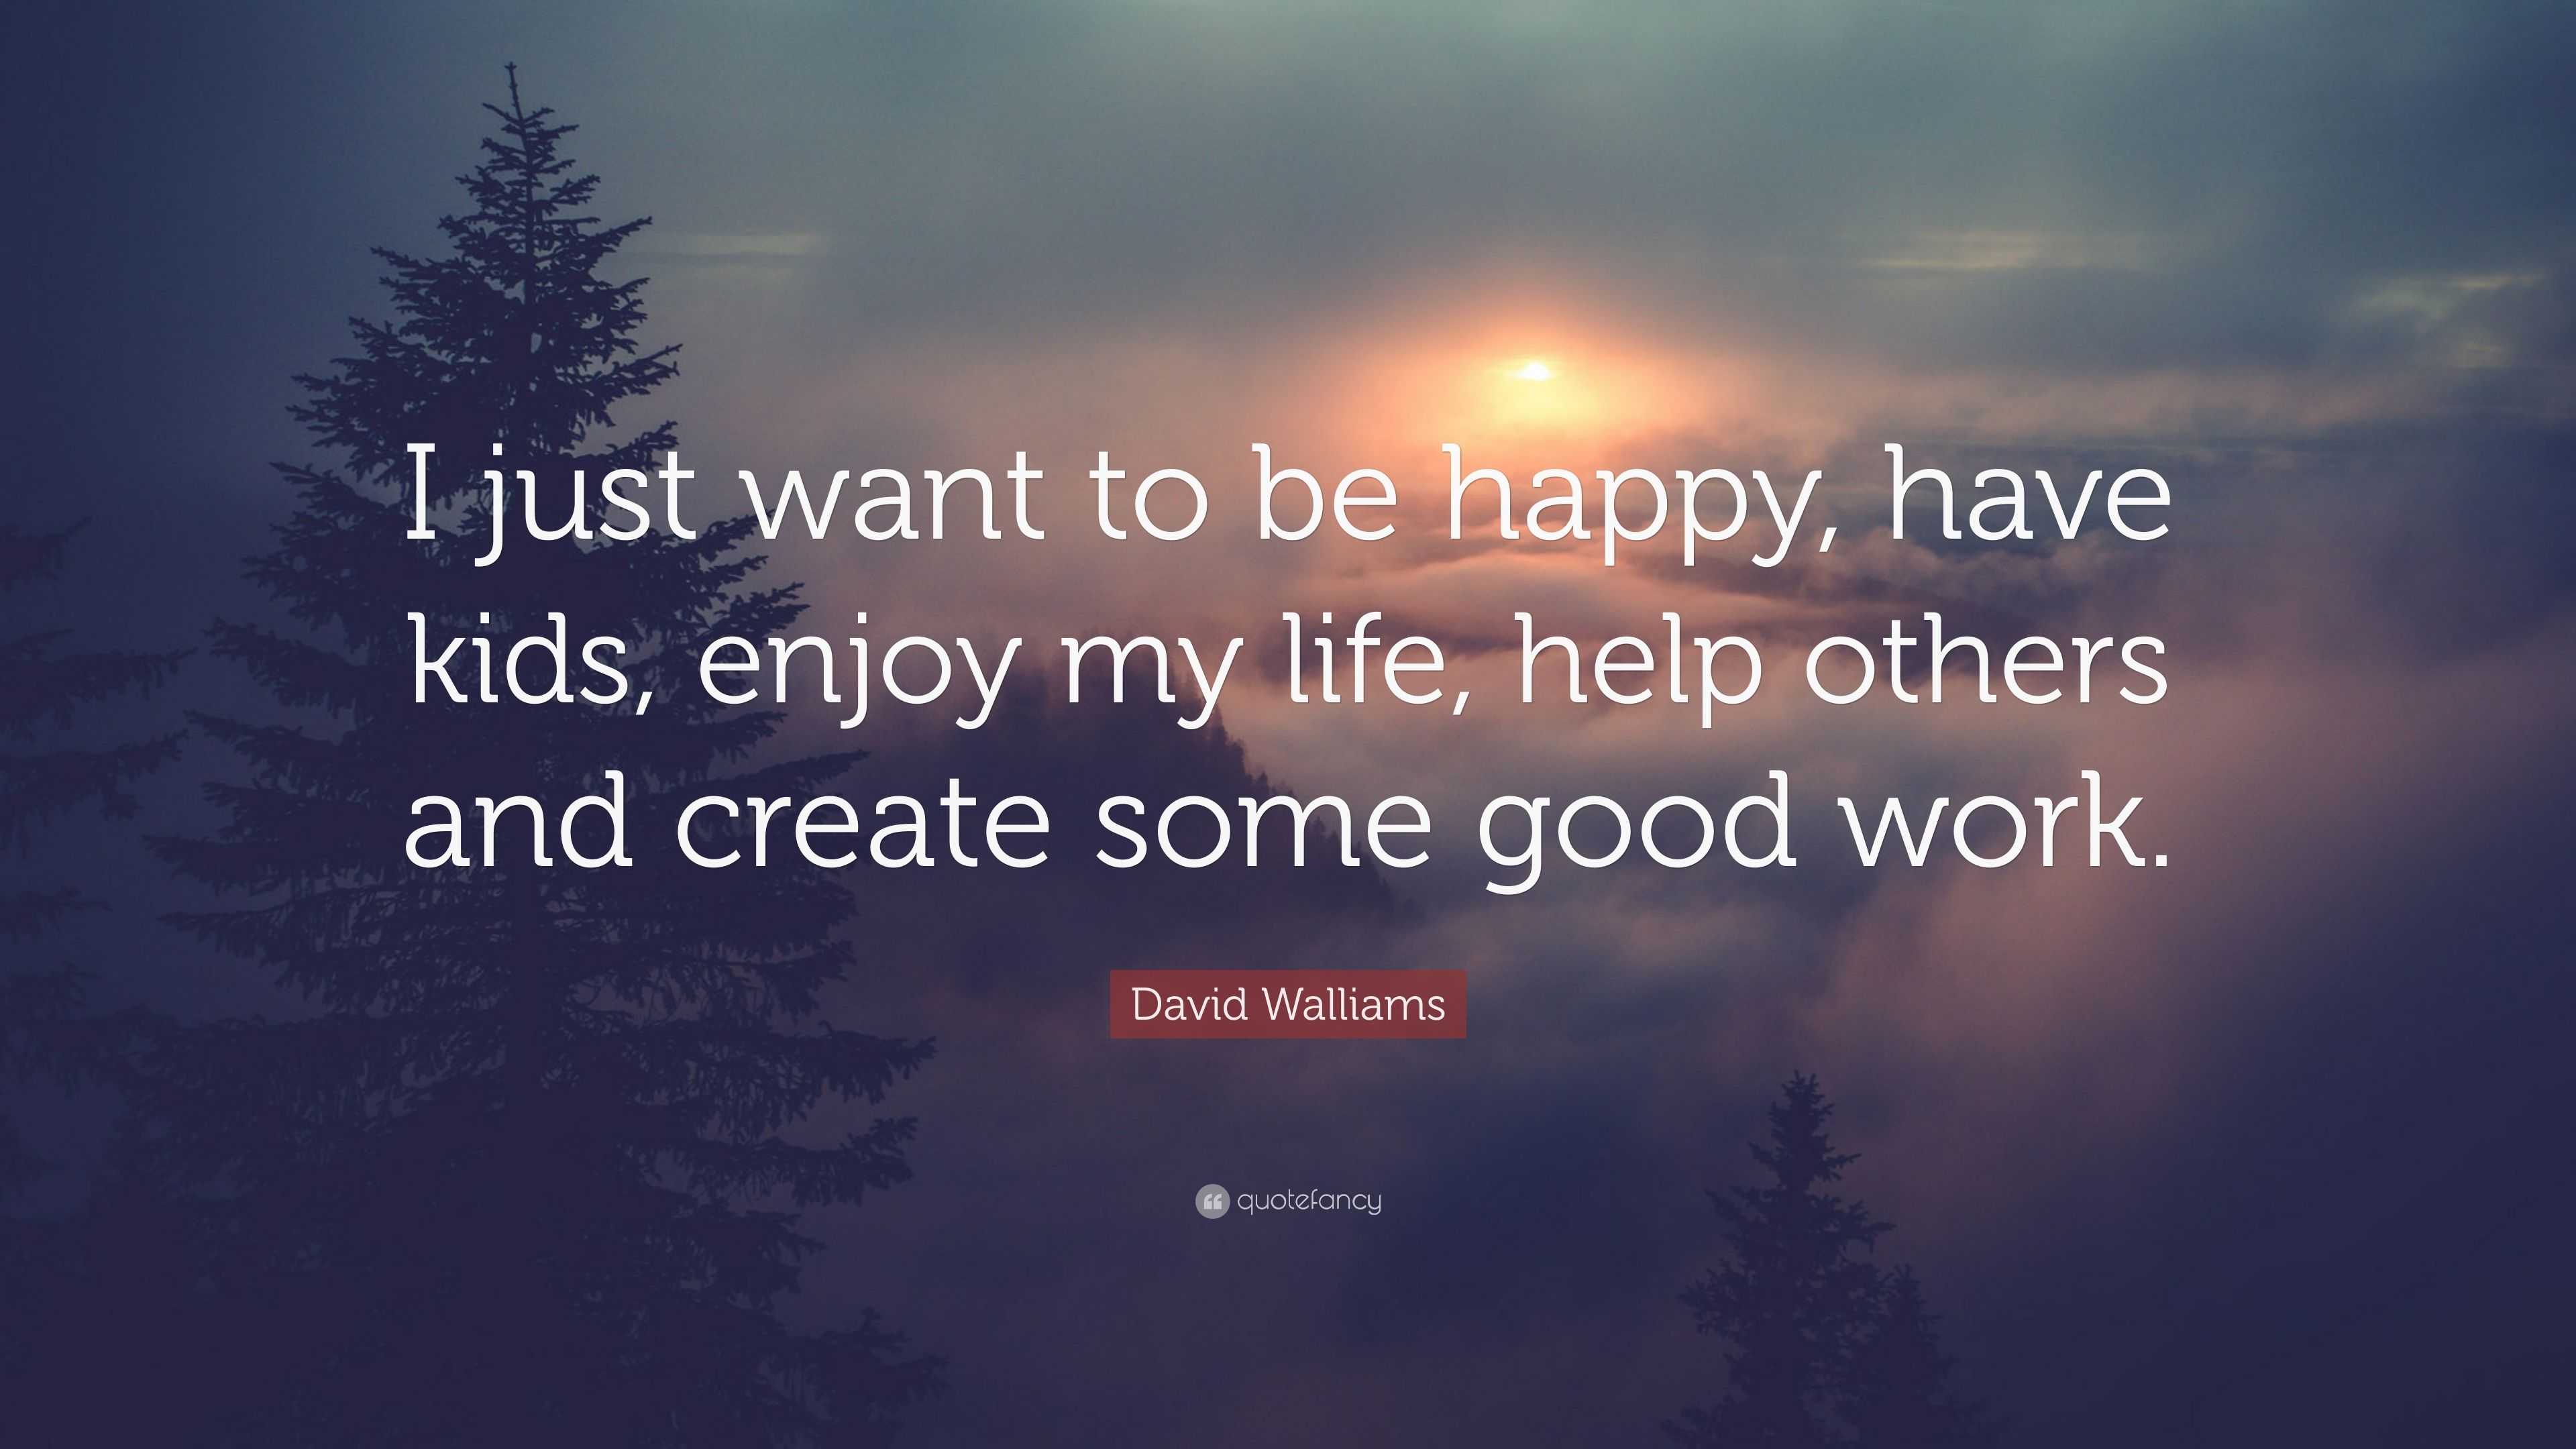 be happy and enjoy life quotes david walliams quote u201ci just want to be happy have kids enjoy